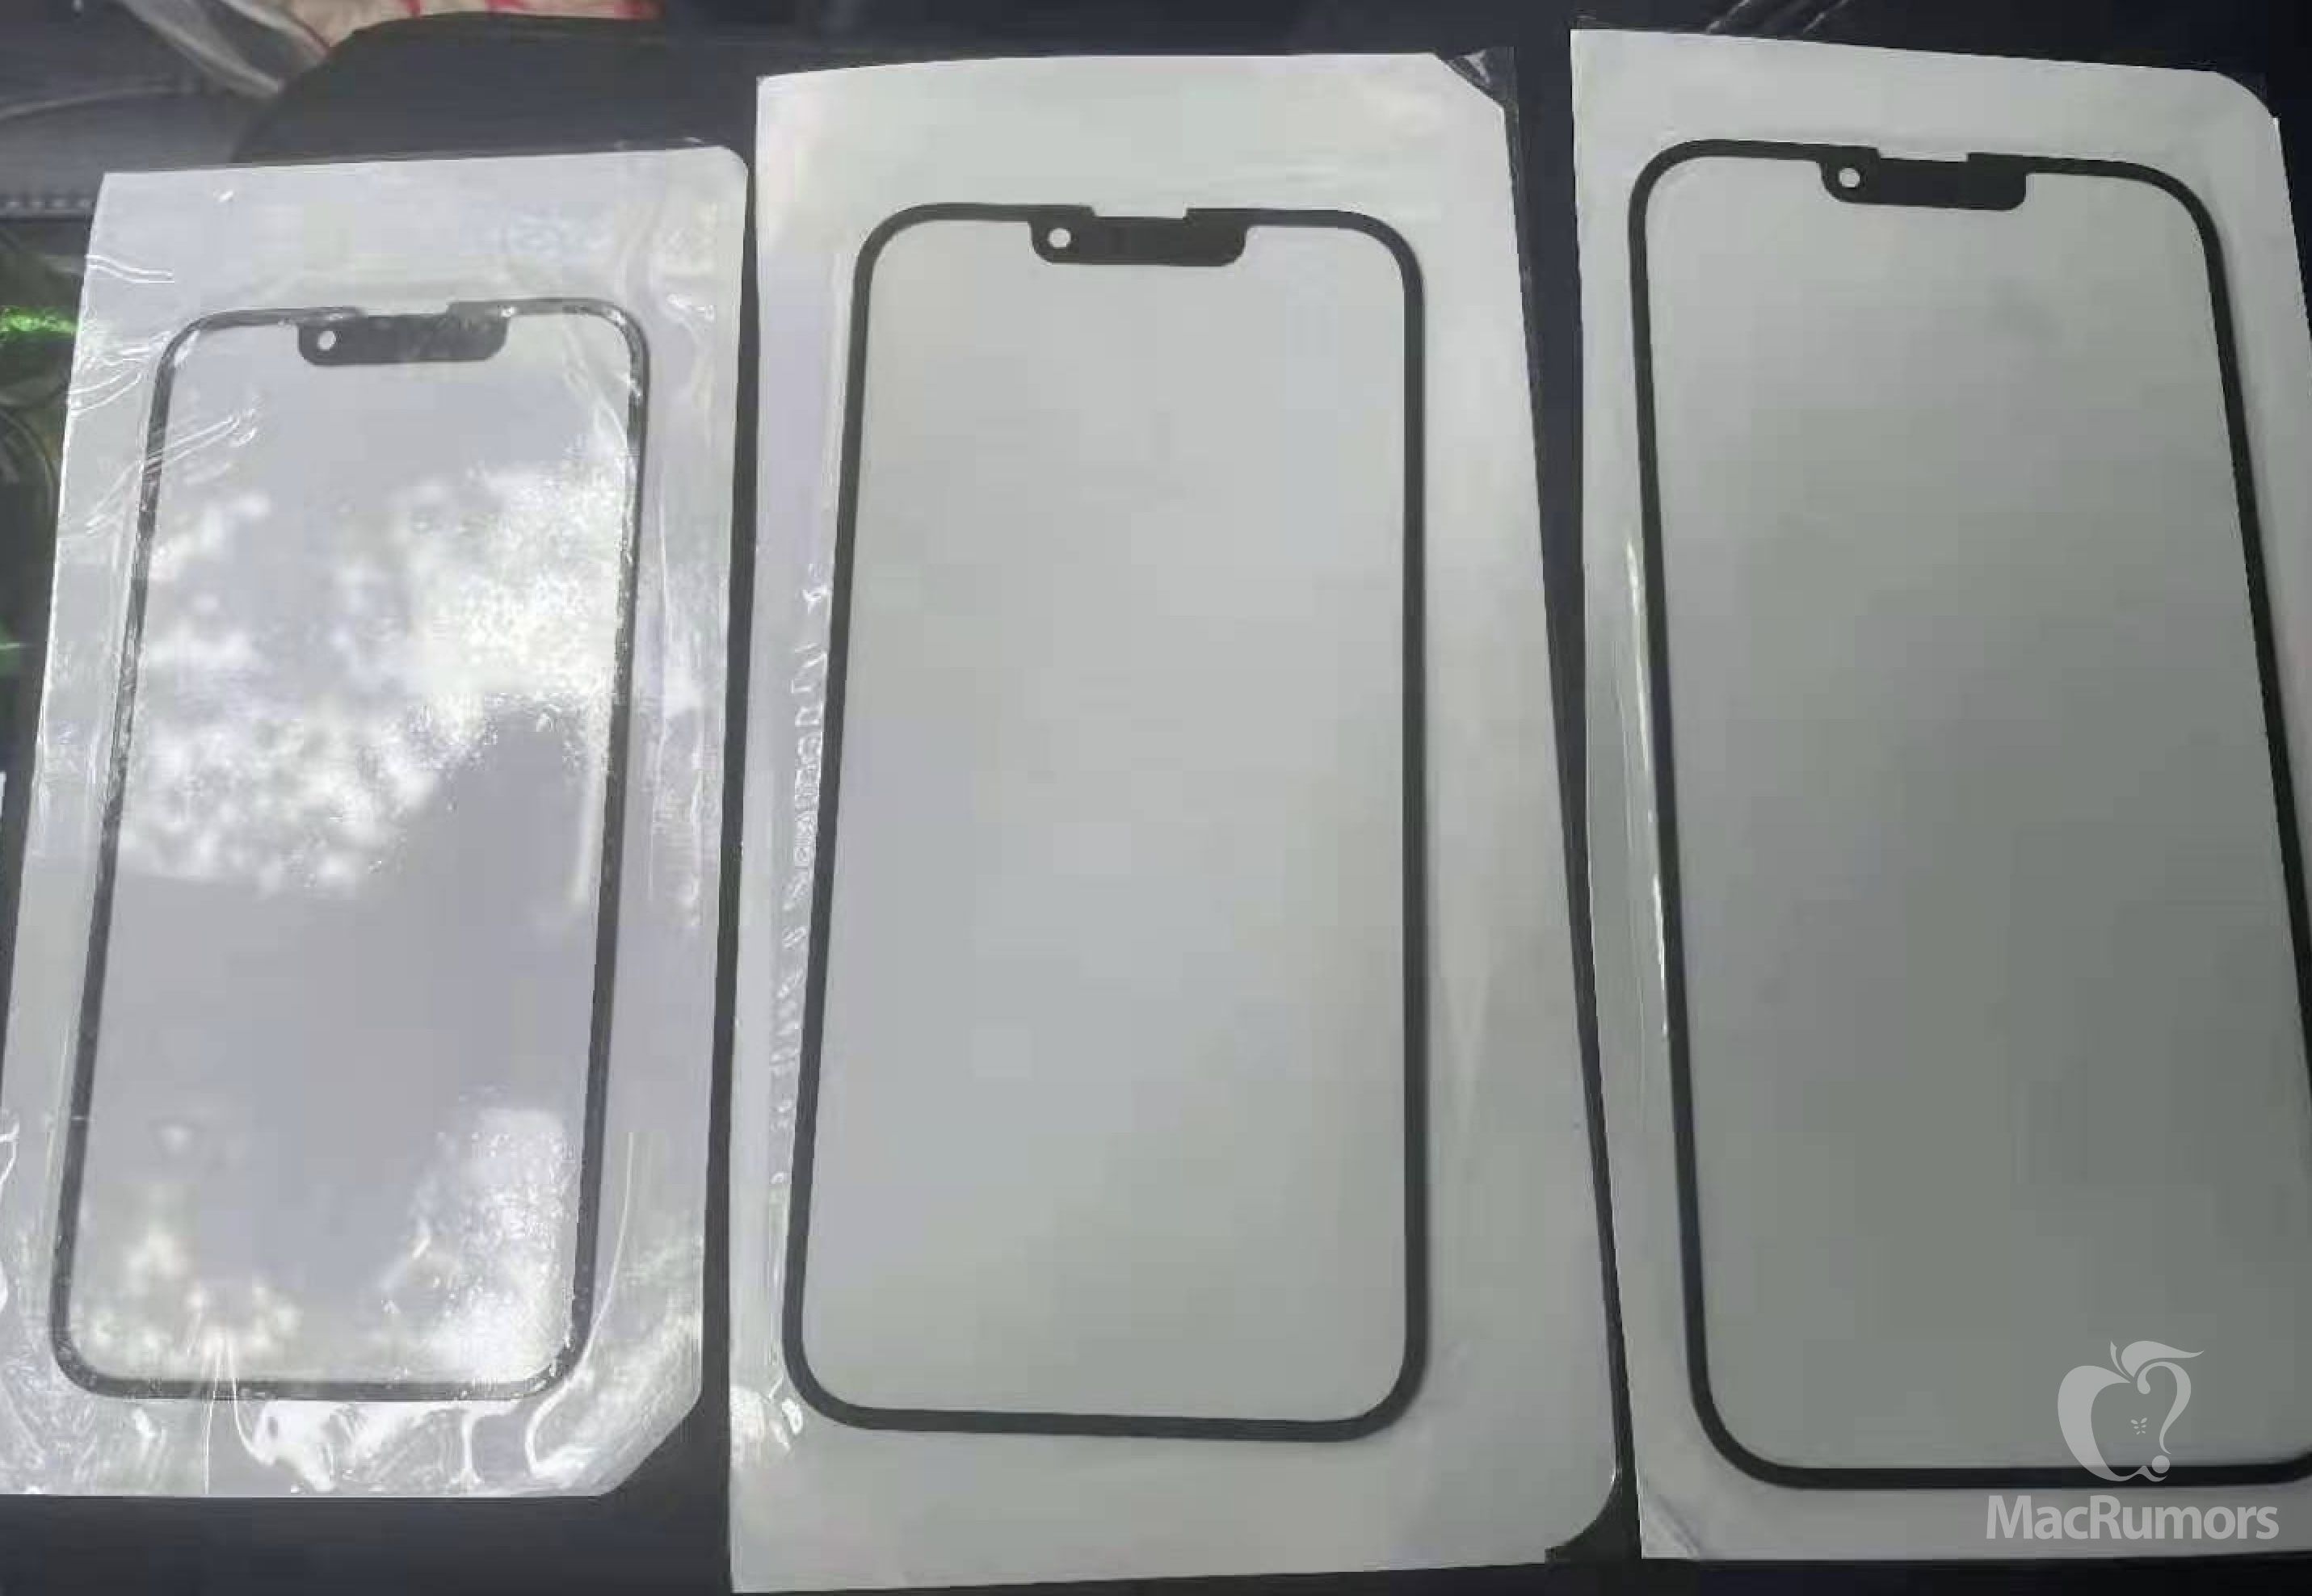 The front glass of the iPhone 13 reveals a smaller notch with the headset relocated to the top bezel